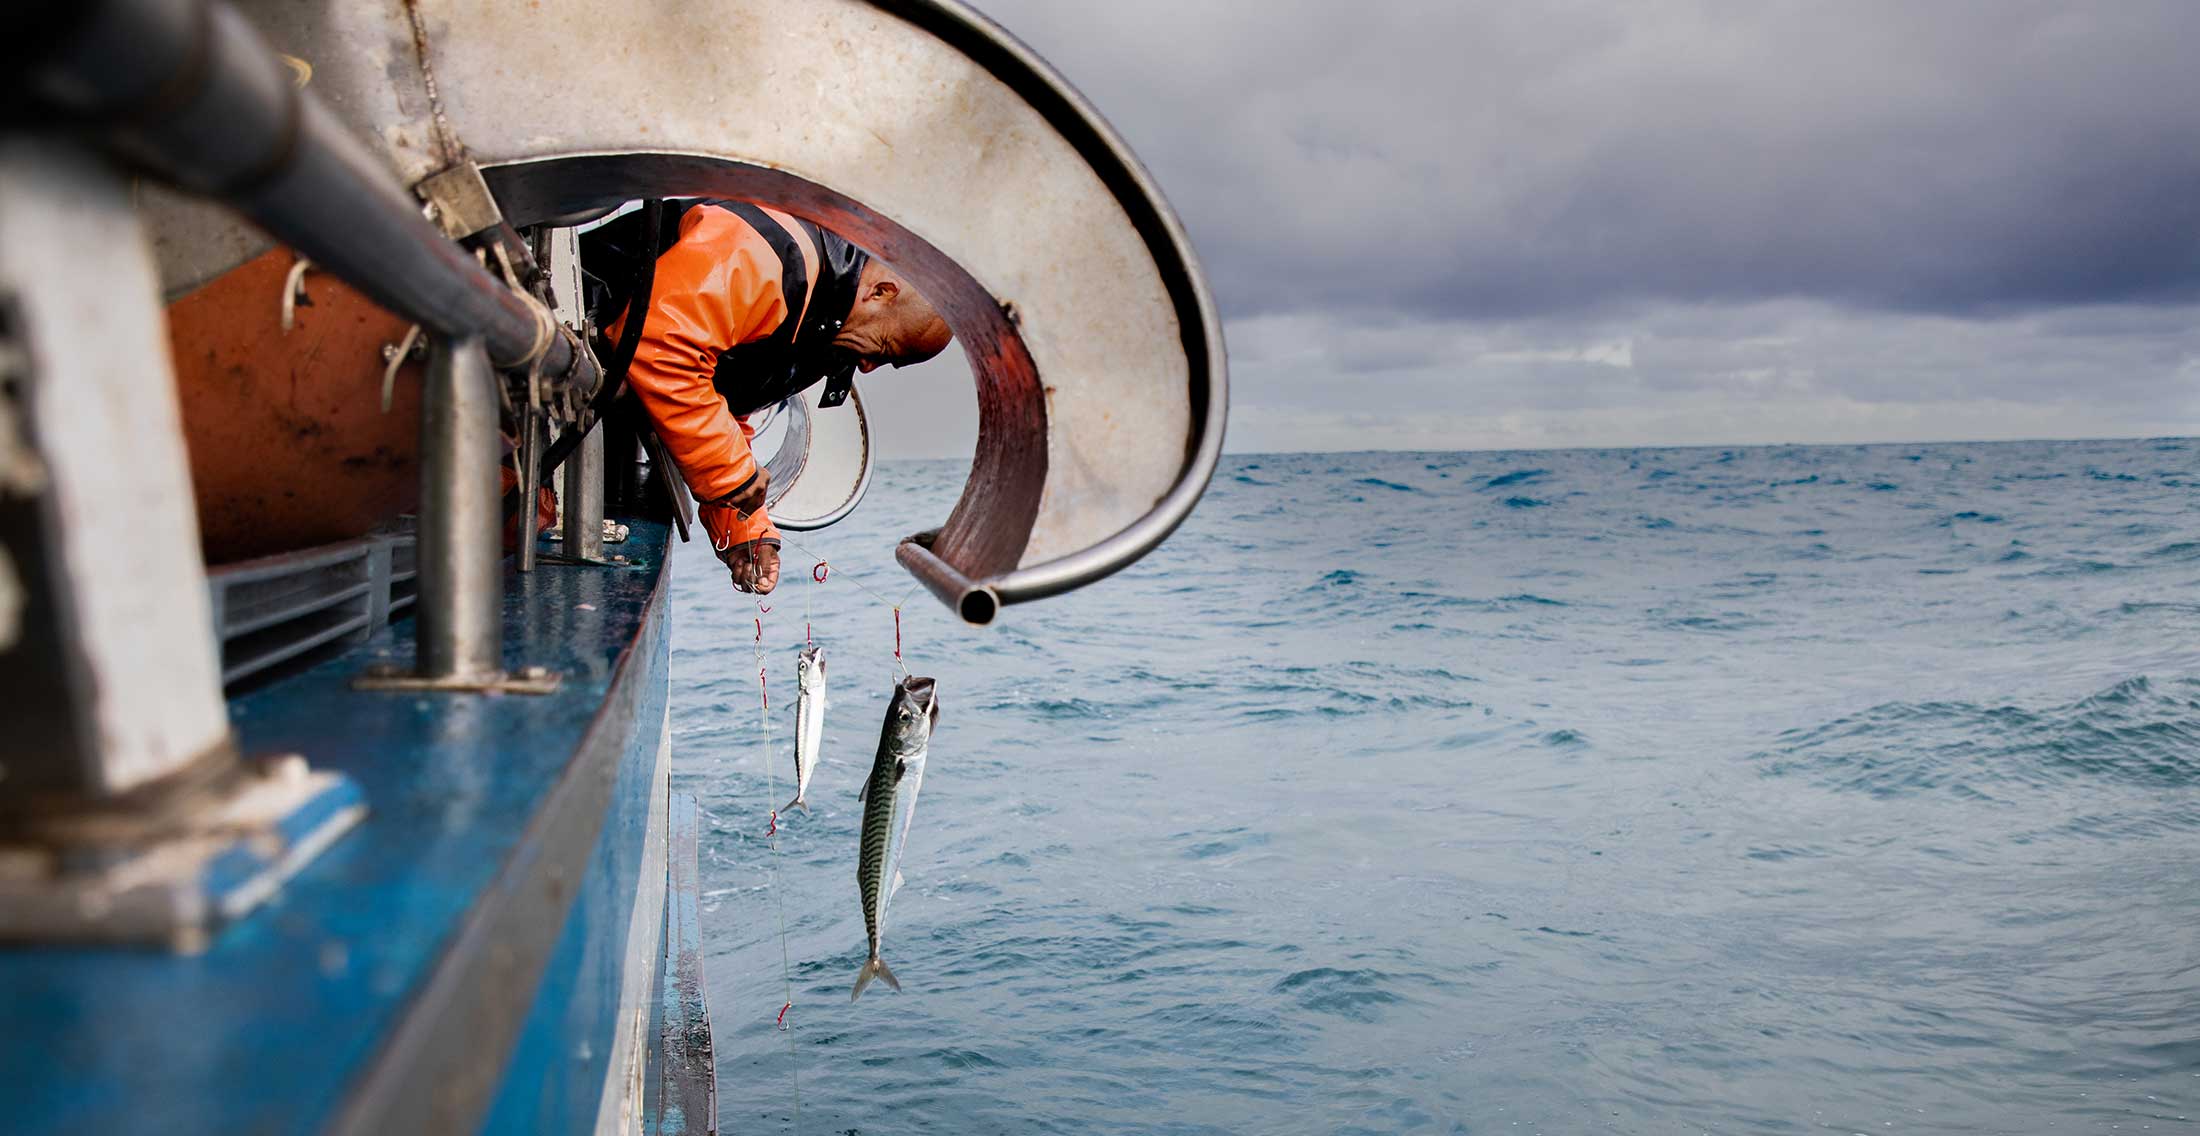 A fisherman leaning over the rail adjusting his line with two small bait fish attached